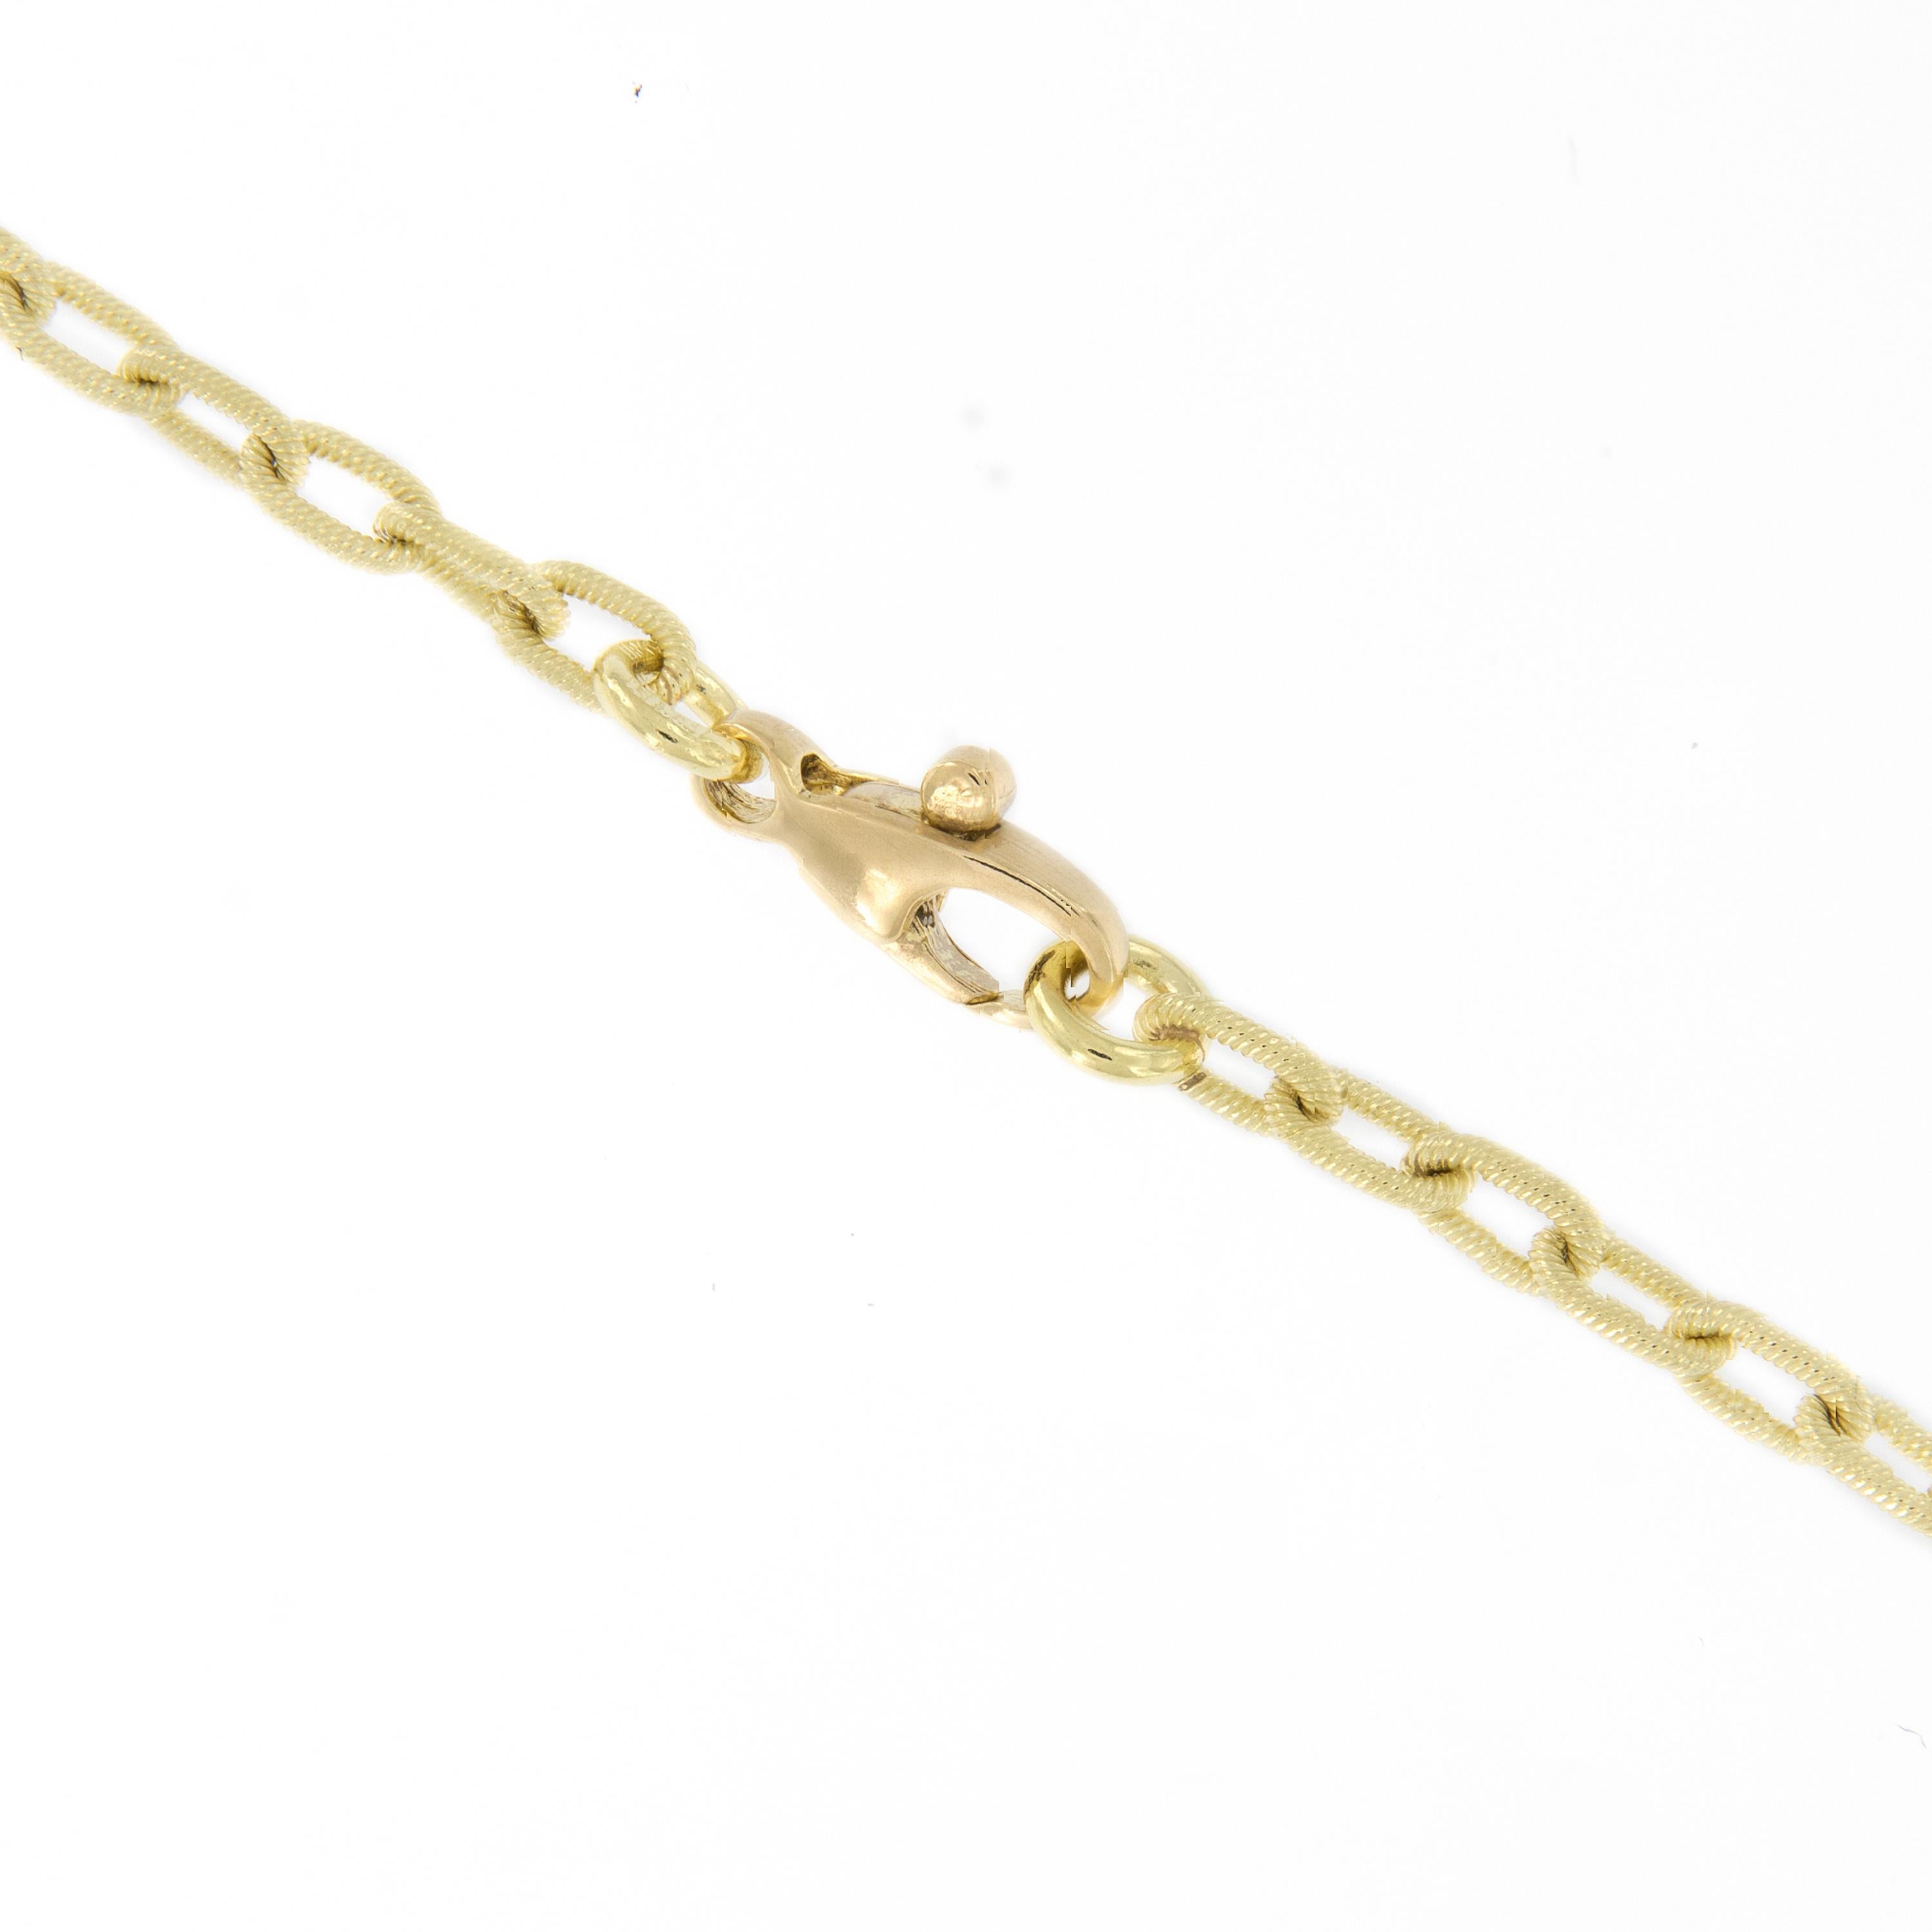 Beautiful handcrafted Italian 18k gold ribbed oval link chain necklace with a lobster clasp. The 18 inch long necklace shimmers on the skin from the soft color & craftsmanship executed on the ribbed finish. 
18KYG
18